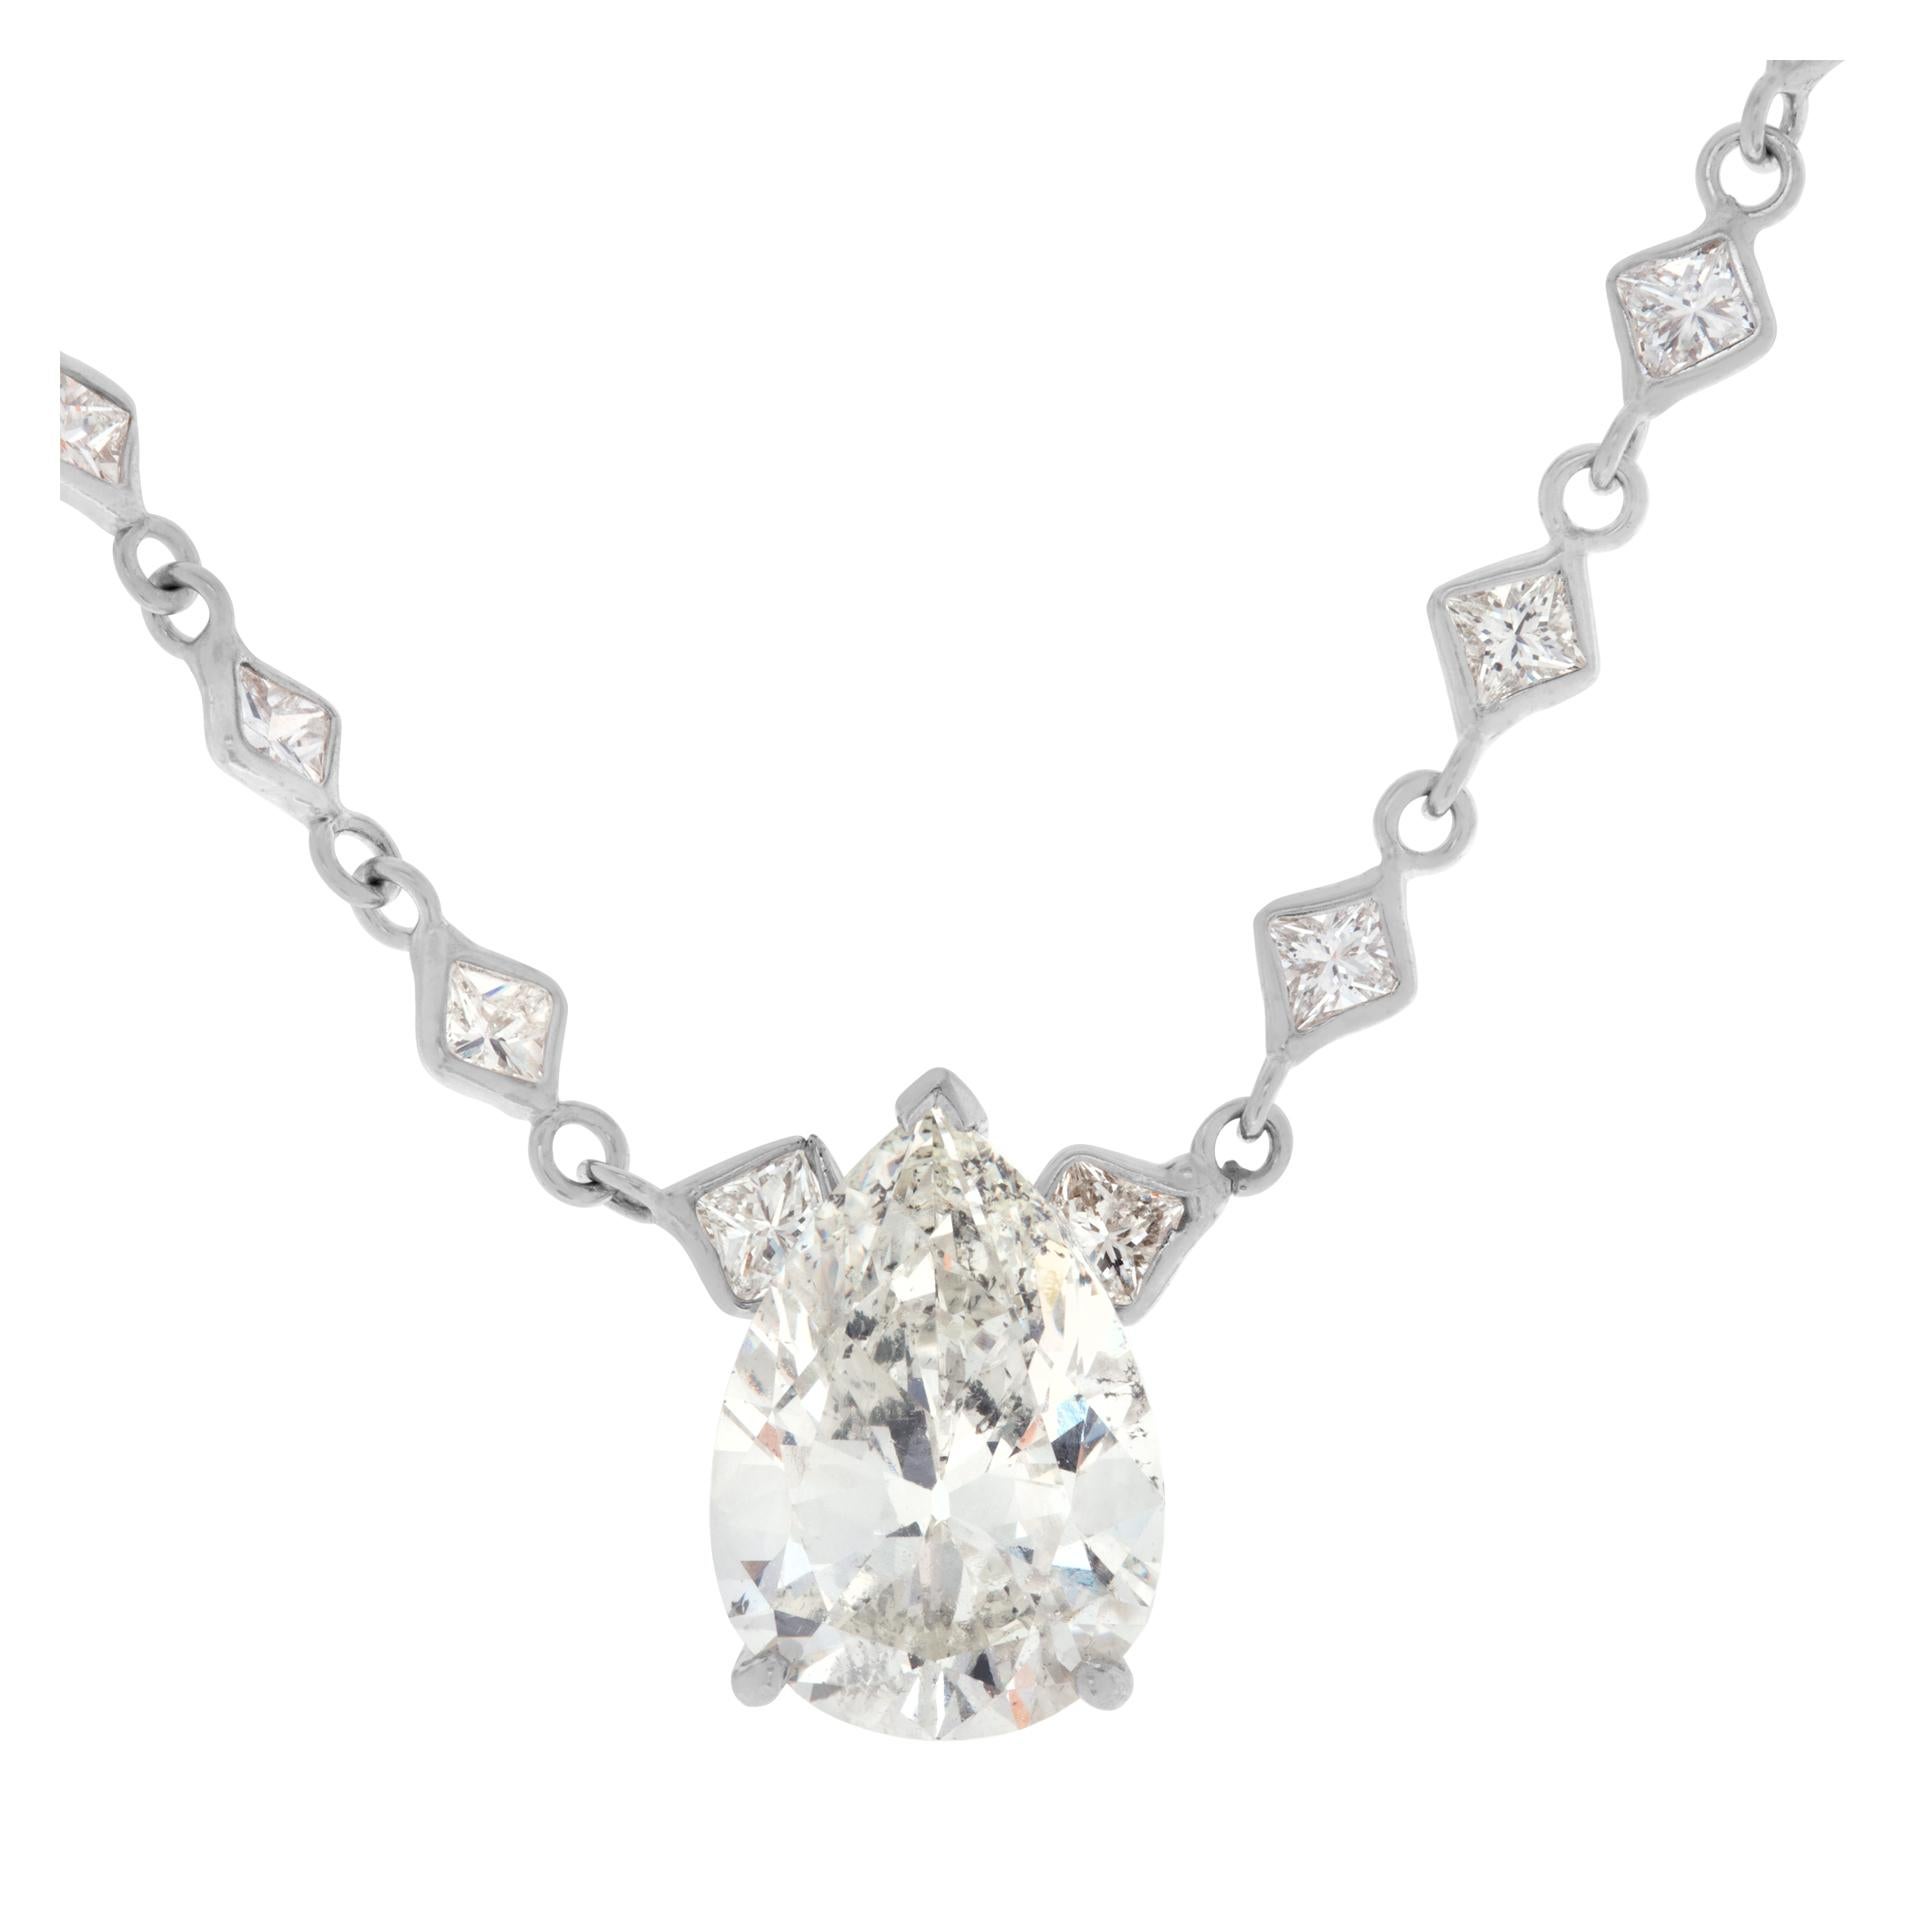 GIA certified center pear shape diamond 3.84 carats (J color, SI2 clarity) on a diamonds-by-the-inch necklace with 5 carats of princess cut diamonds averaging H color, SI clarity. Length 16 inches.